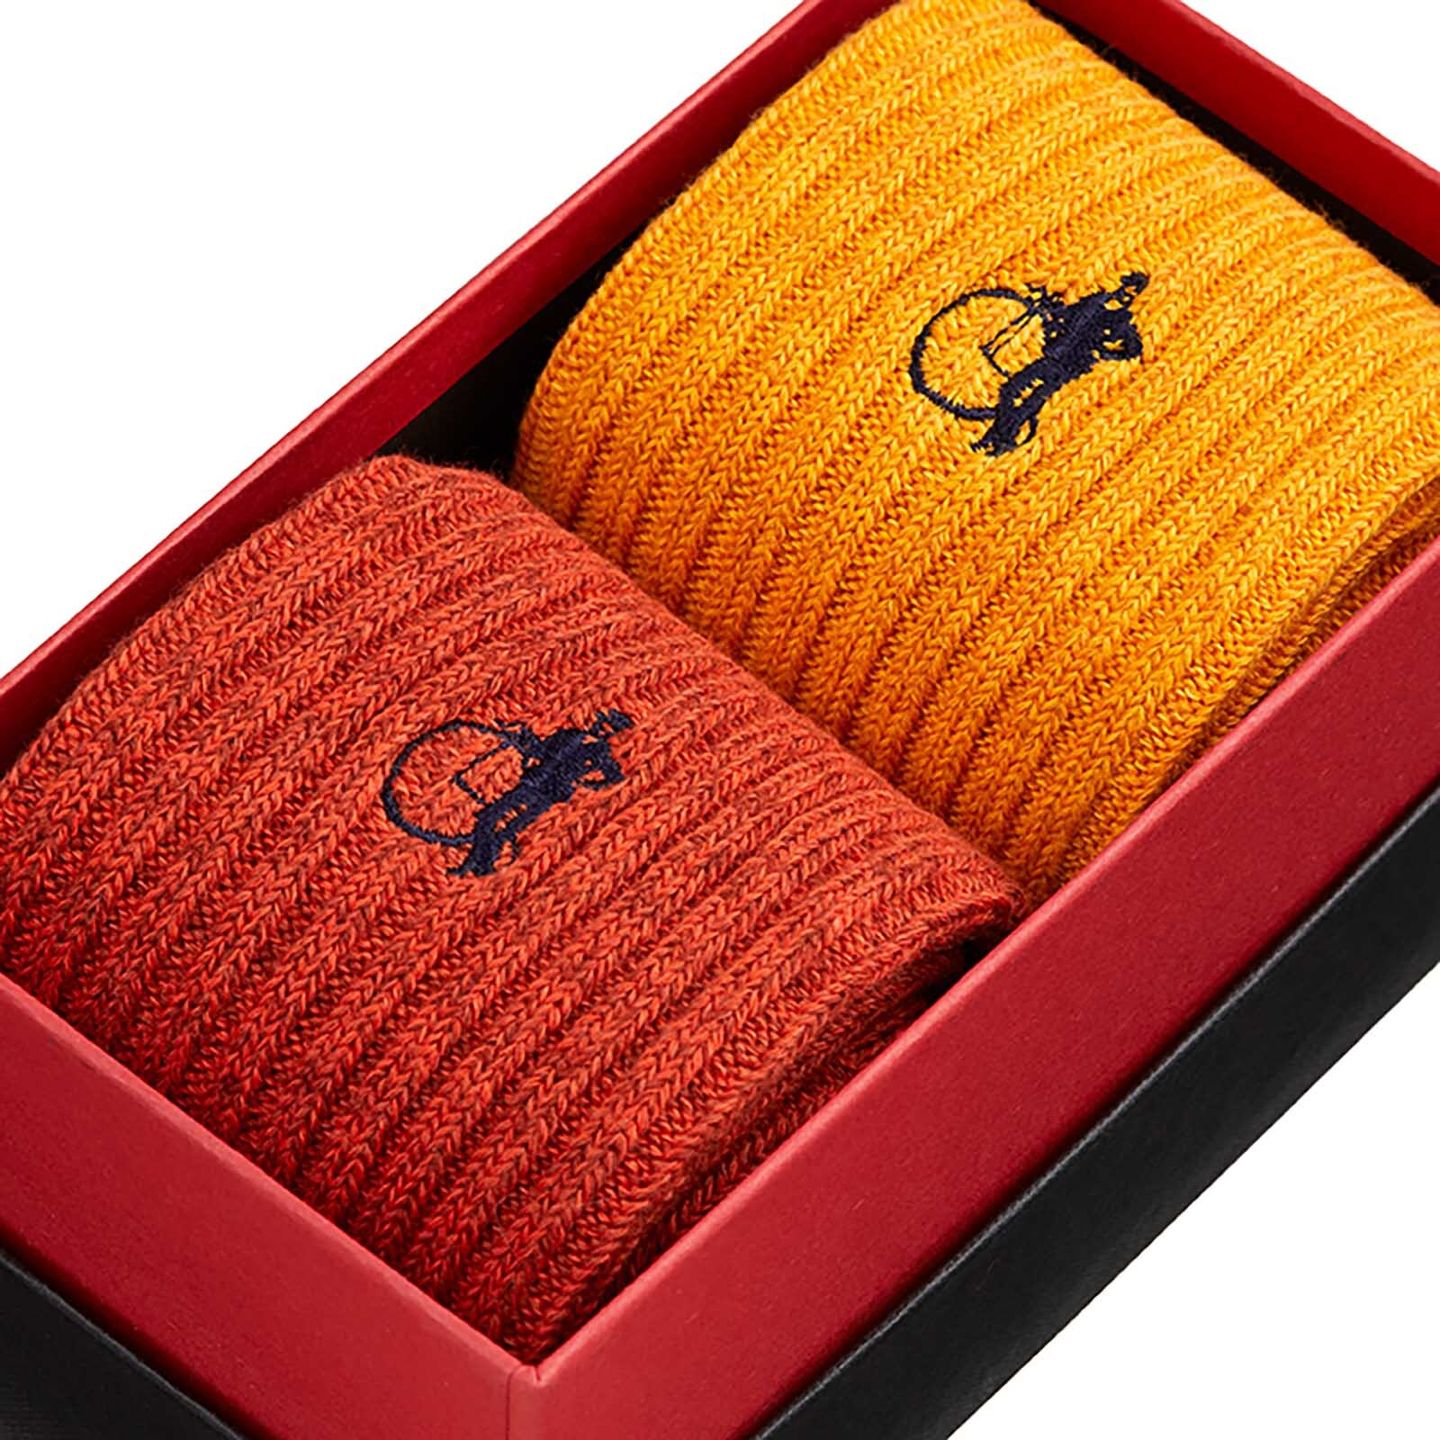 Close up of the outdoor presentation box with a yellow and orange pair of mens socks